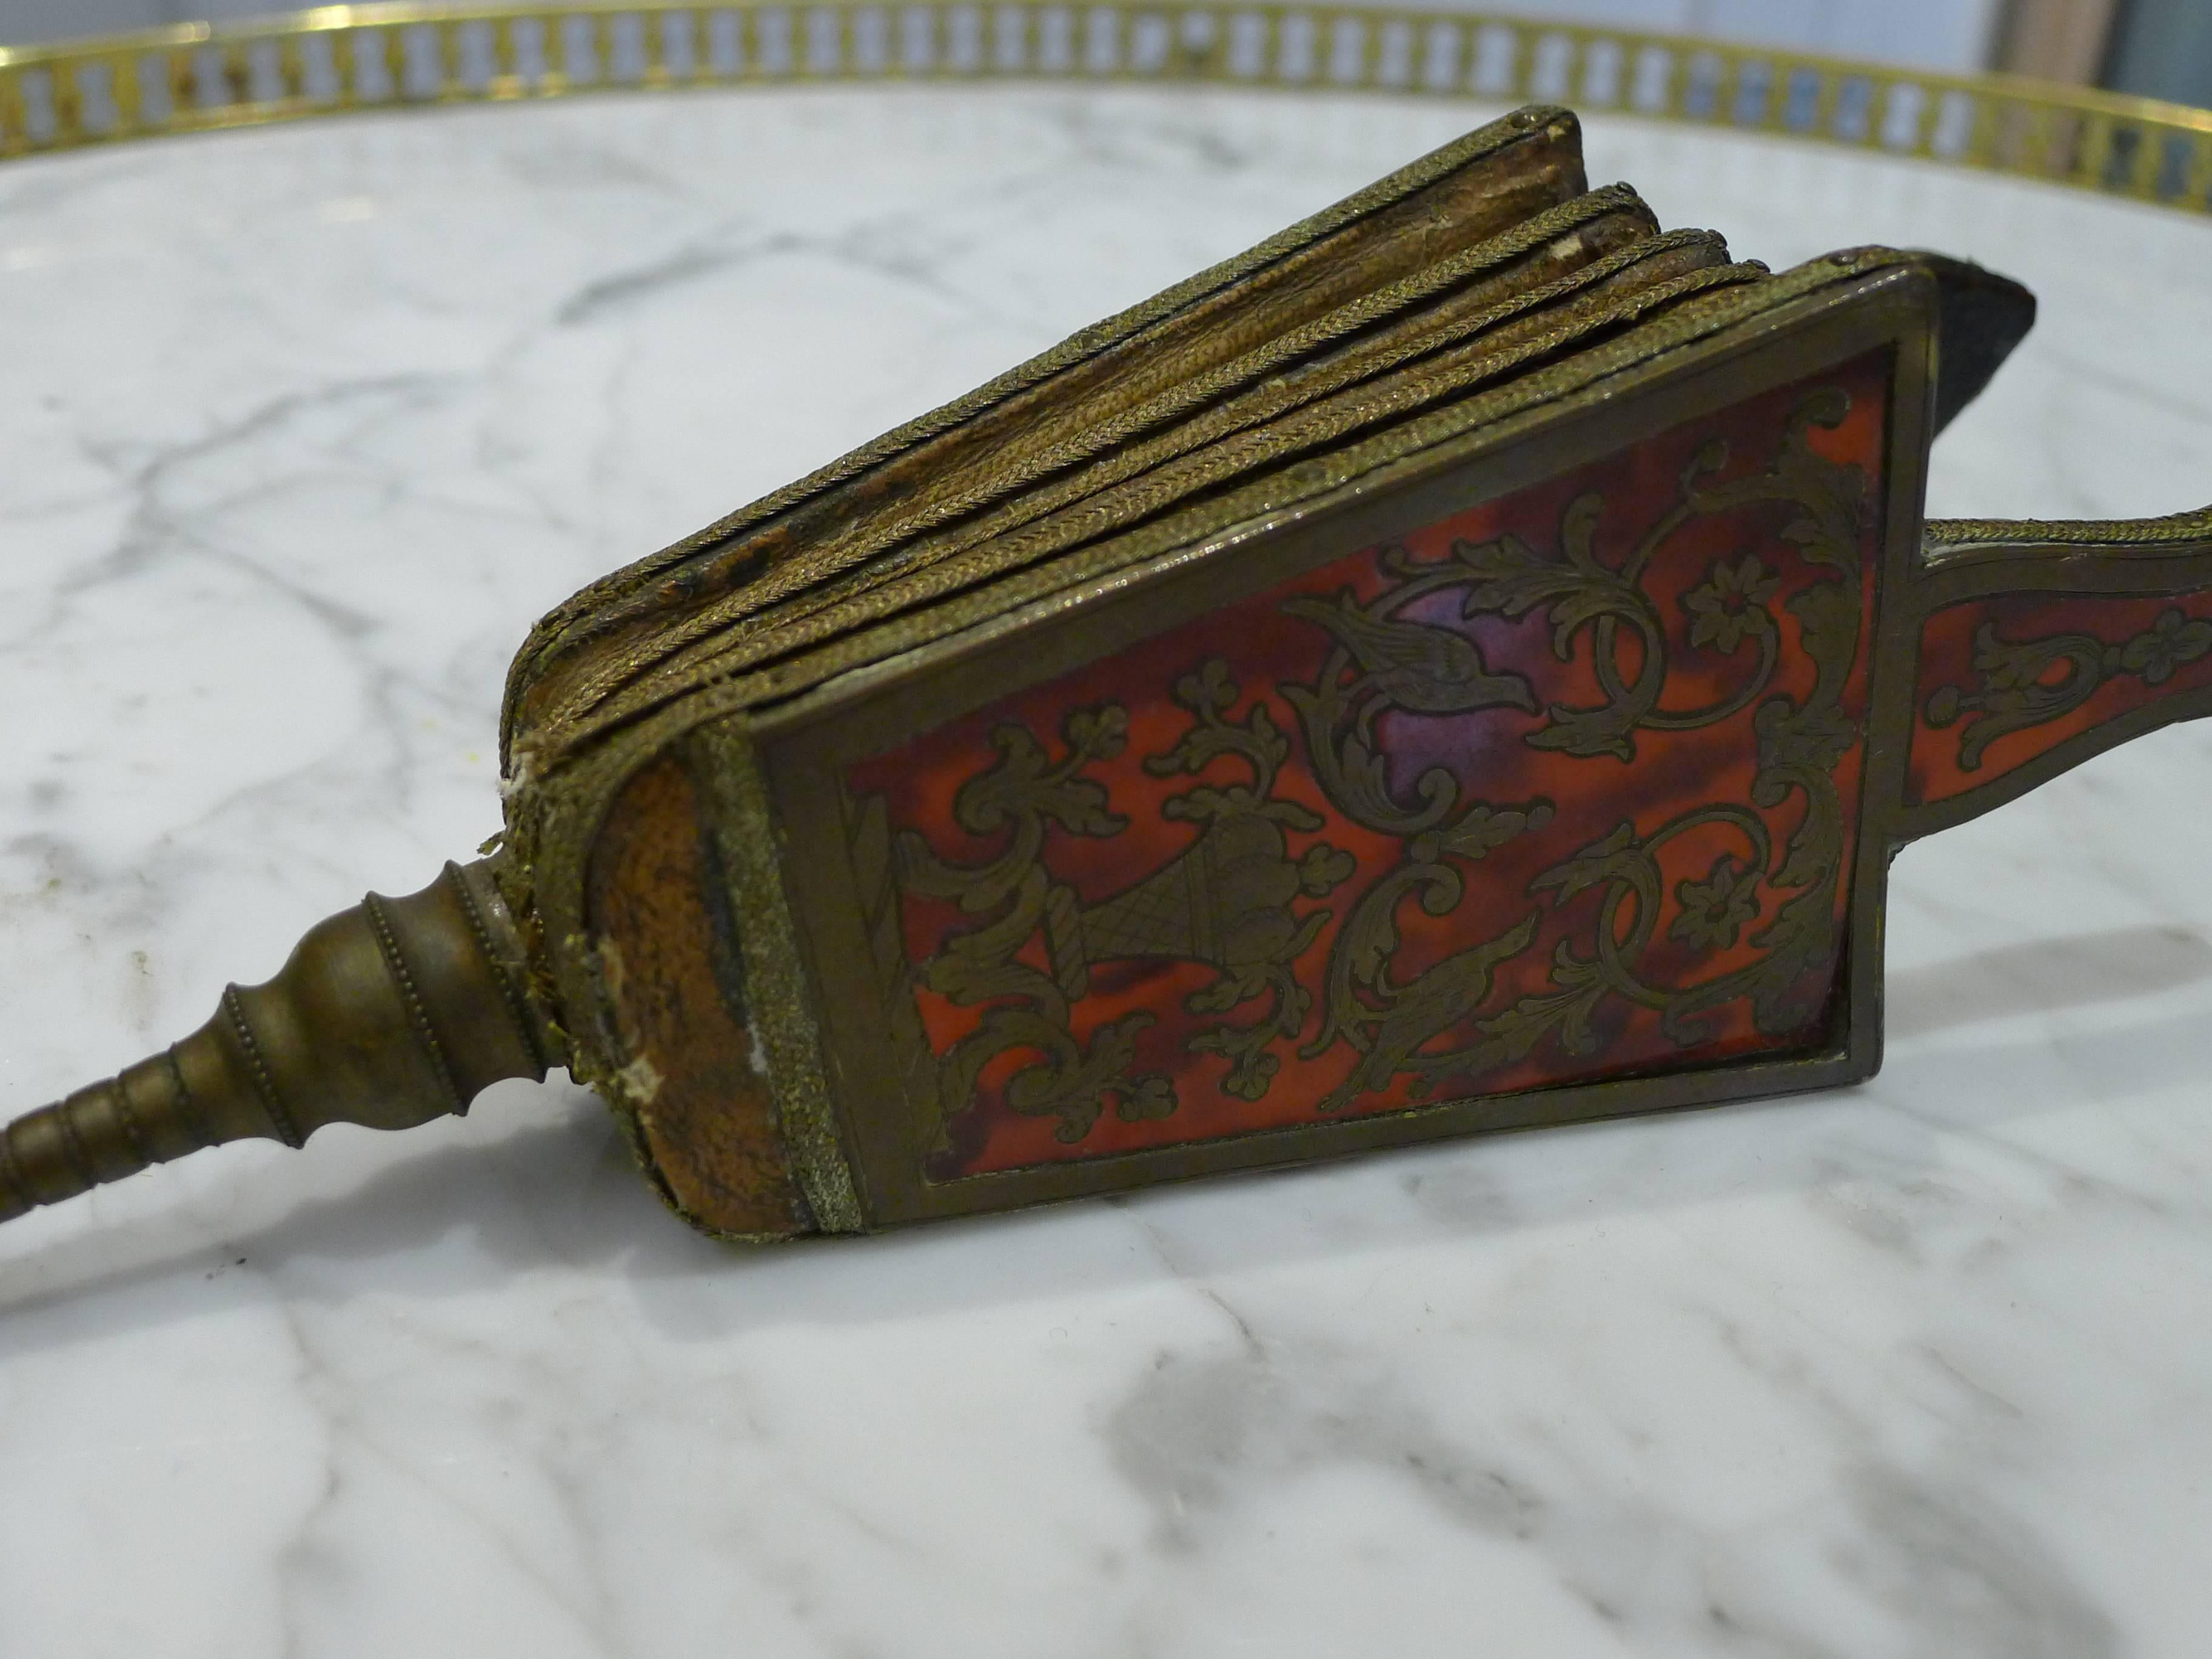 Adorable little bellows decorated with motifs inlaid and marquetry, a side 